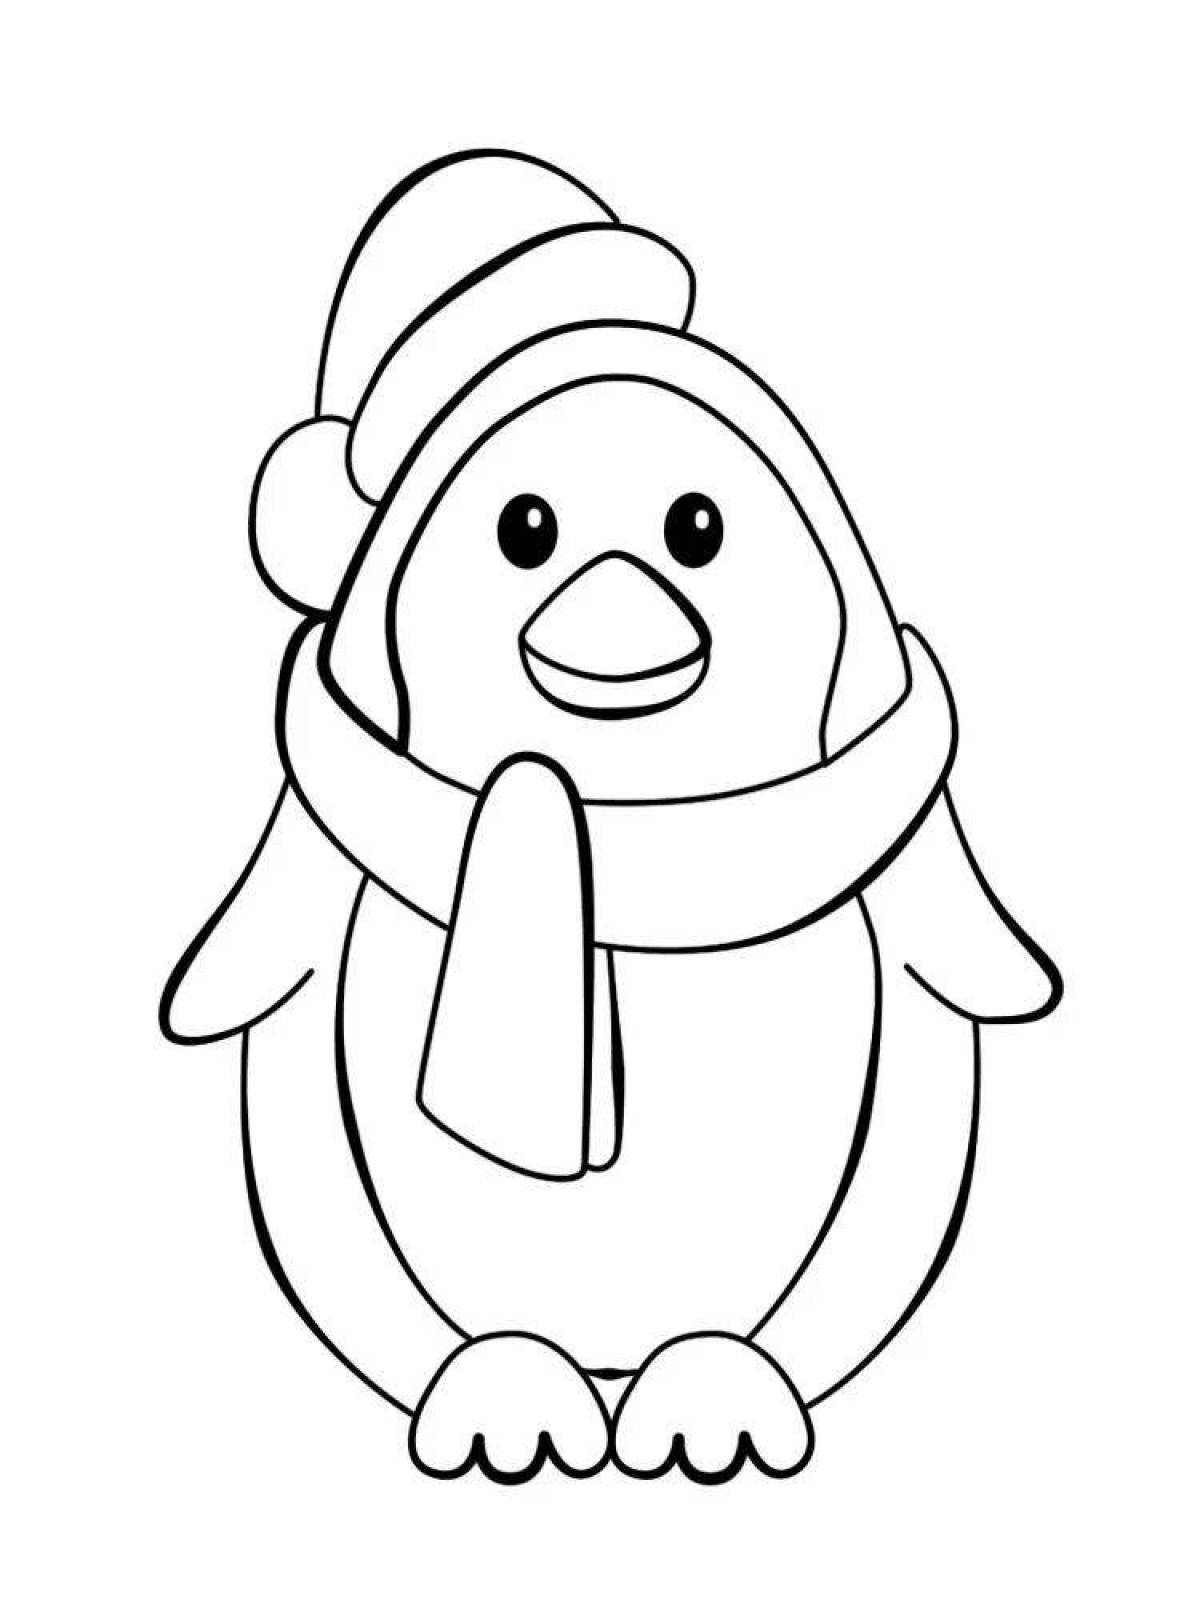 Coloring page shining christmas penguin